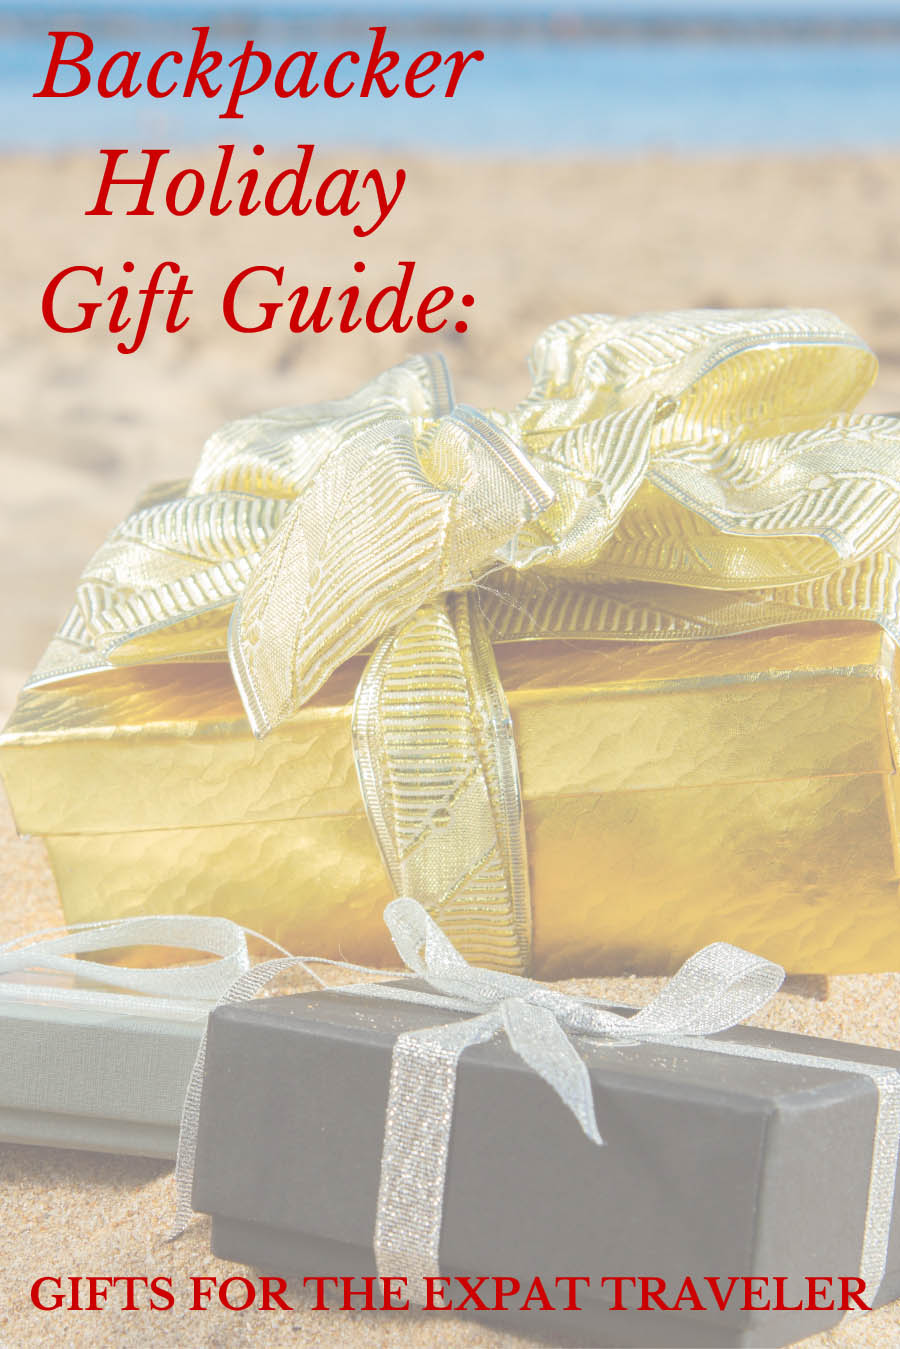 Backpacker Holiday Gift Guide: Gifts for the Expat Traveler